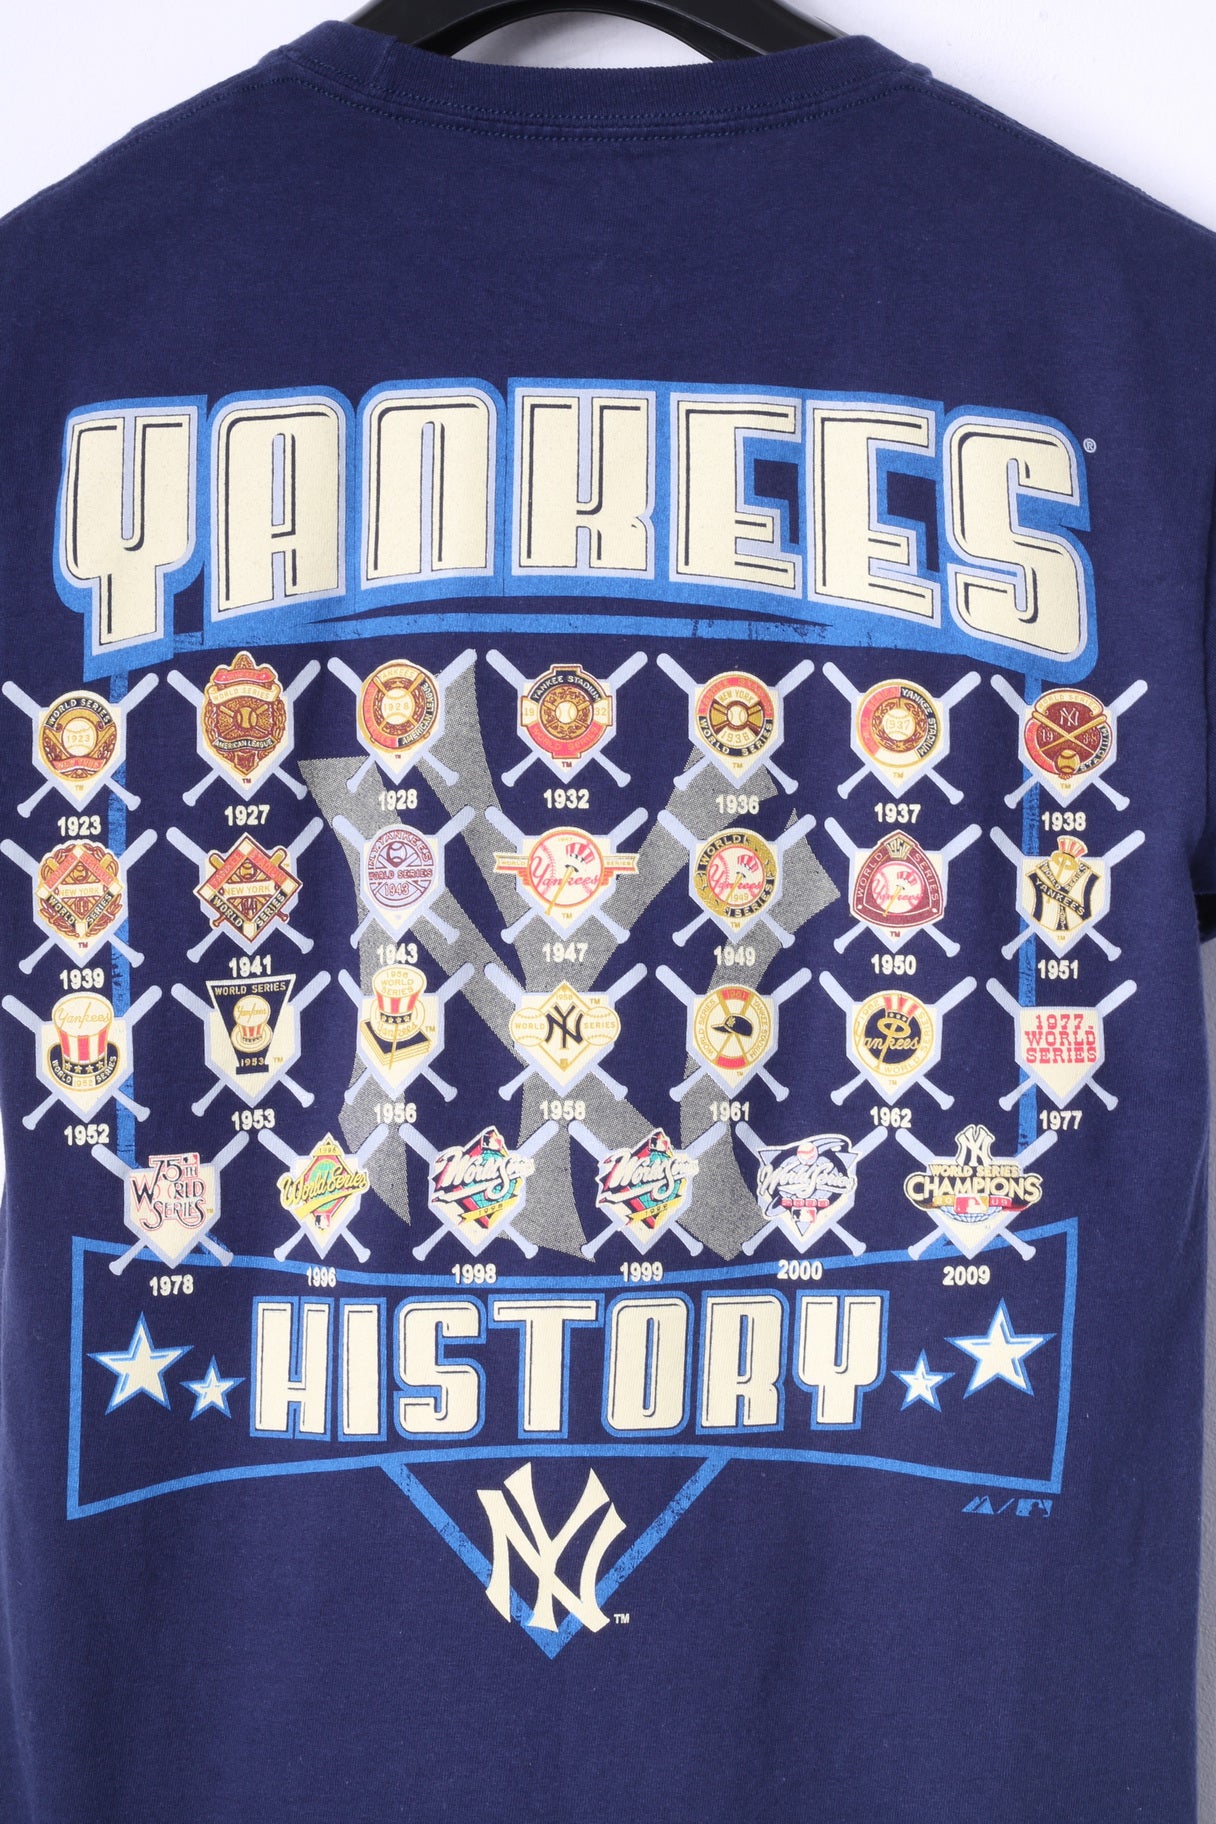 Majestic Boys S 14 Age Shirt Navy Cotton New York Yankees Graphic Back Top